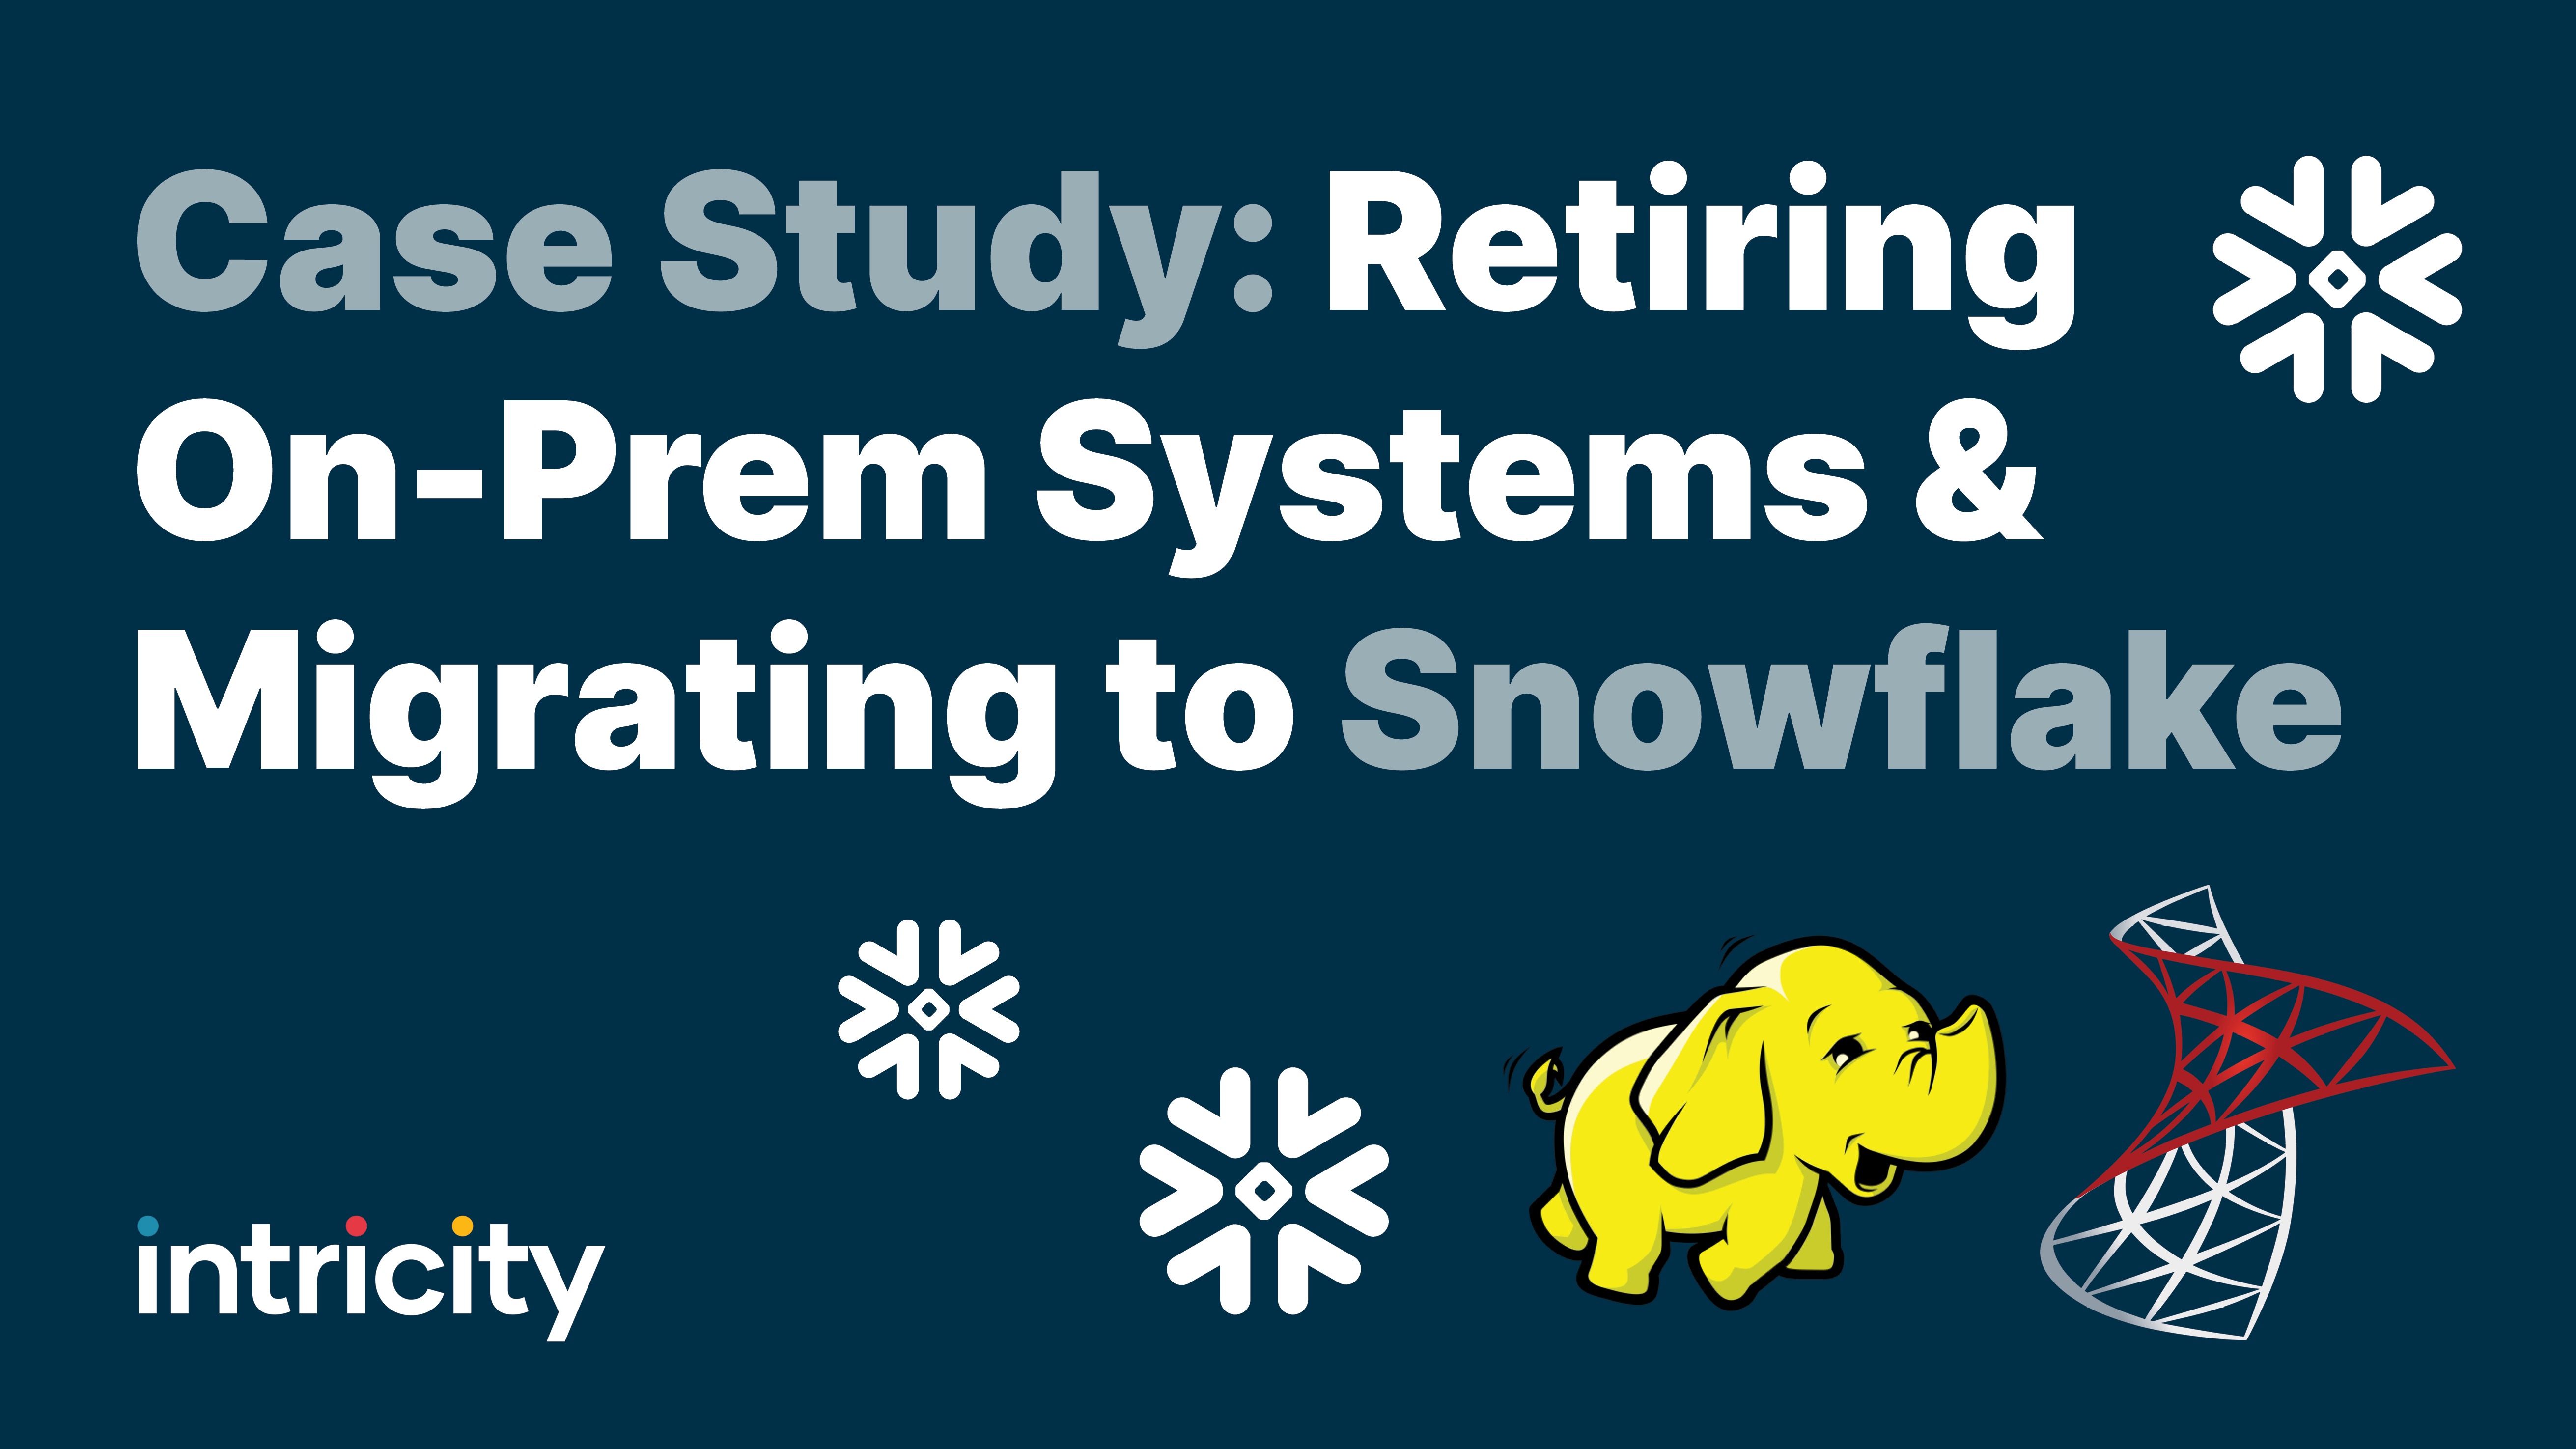 Case Study: Retiring On-Prem Systems & Migrating to Snowflake